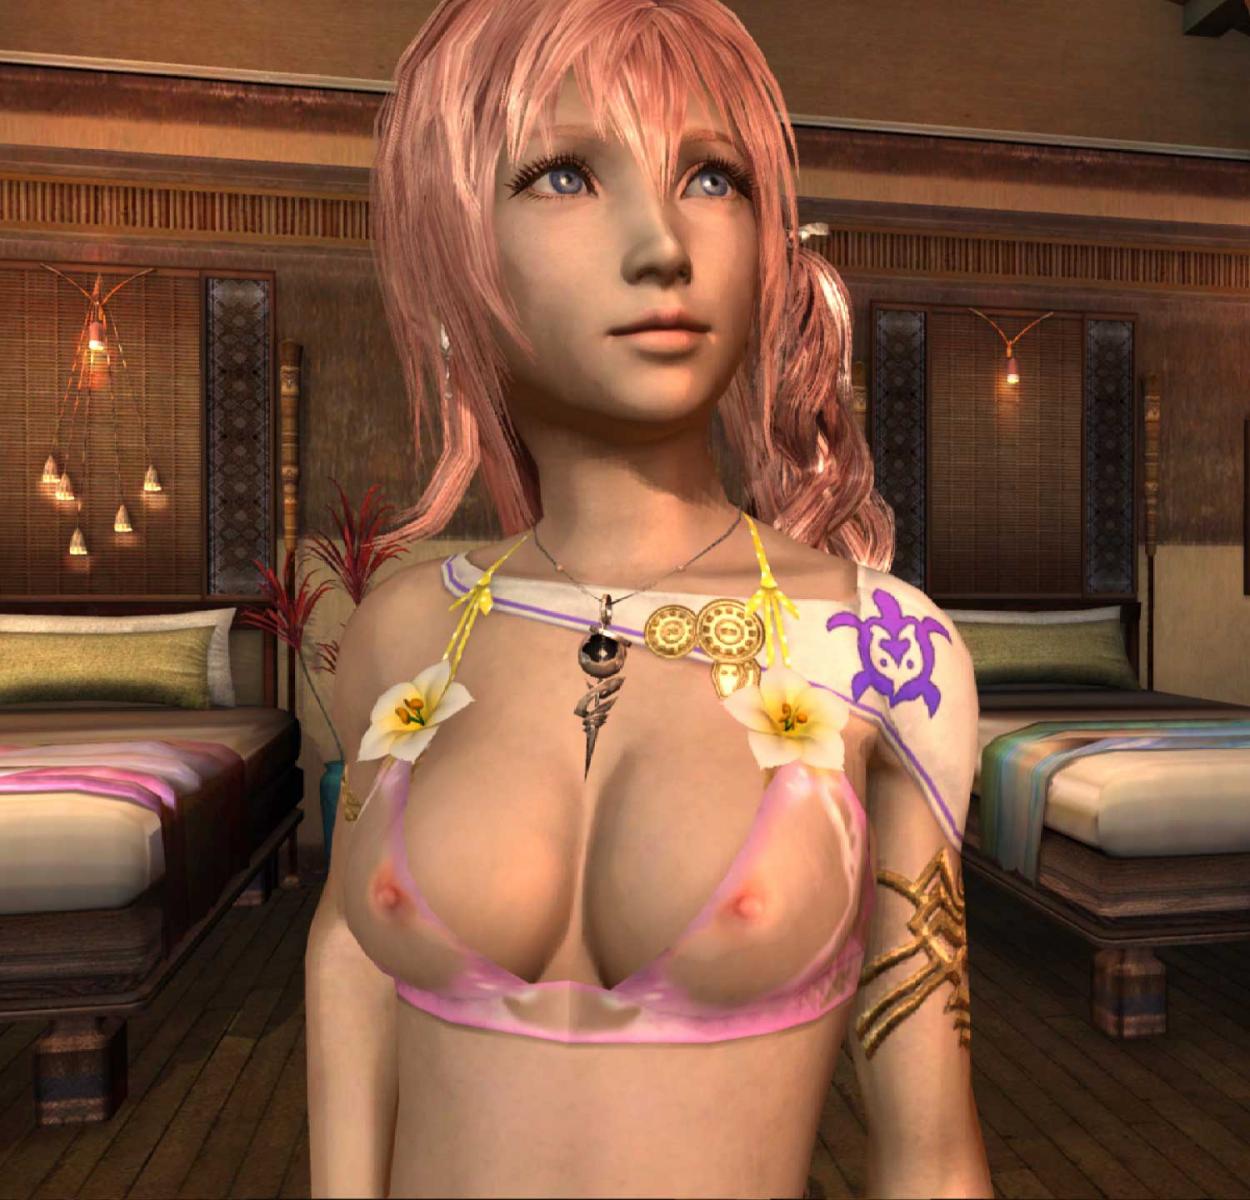 Could We Get Final Fantasy 13 Nude Mod Adult Gaming